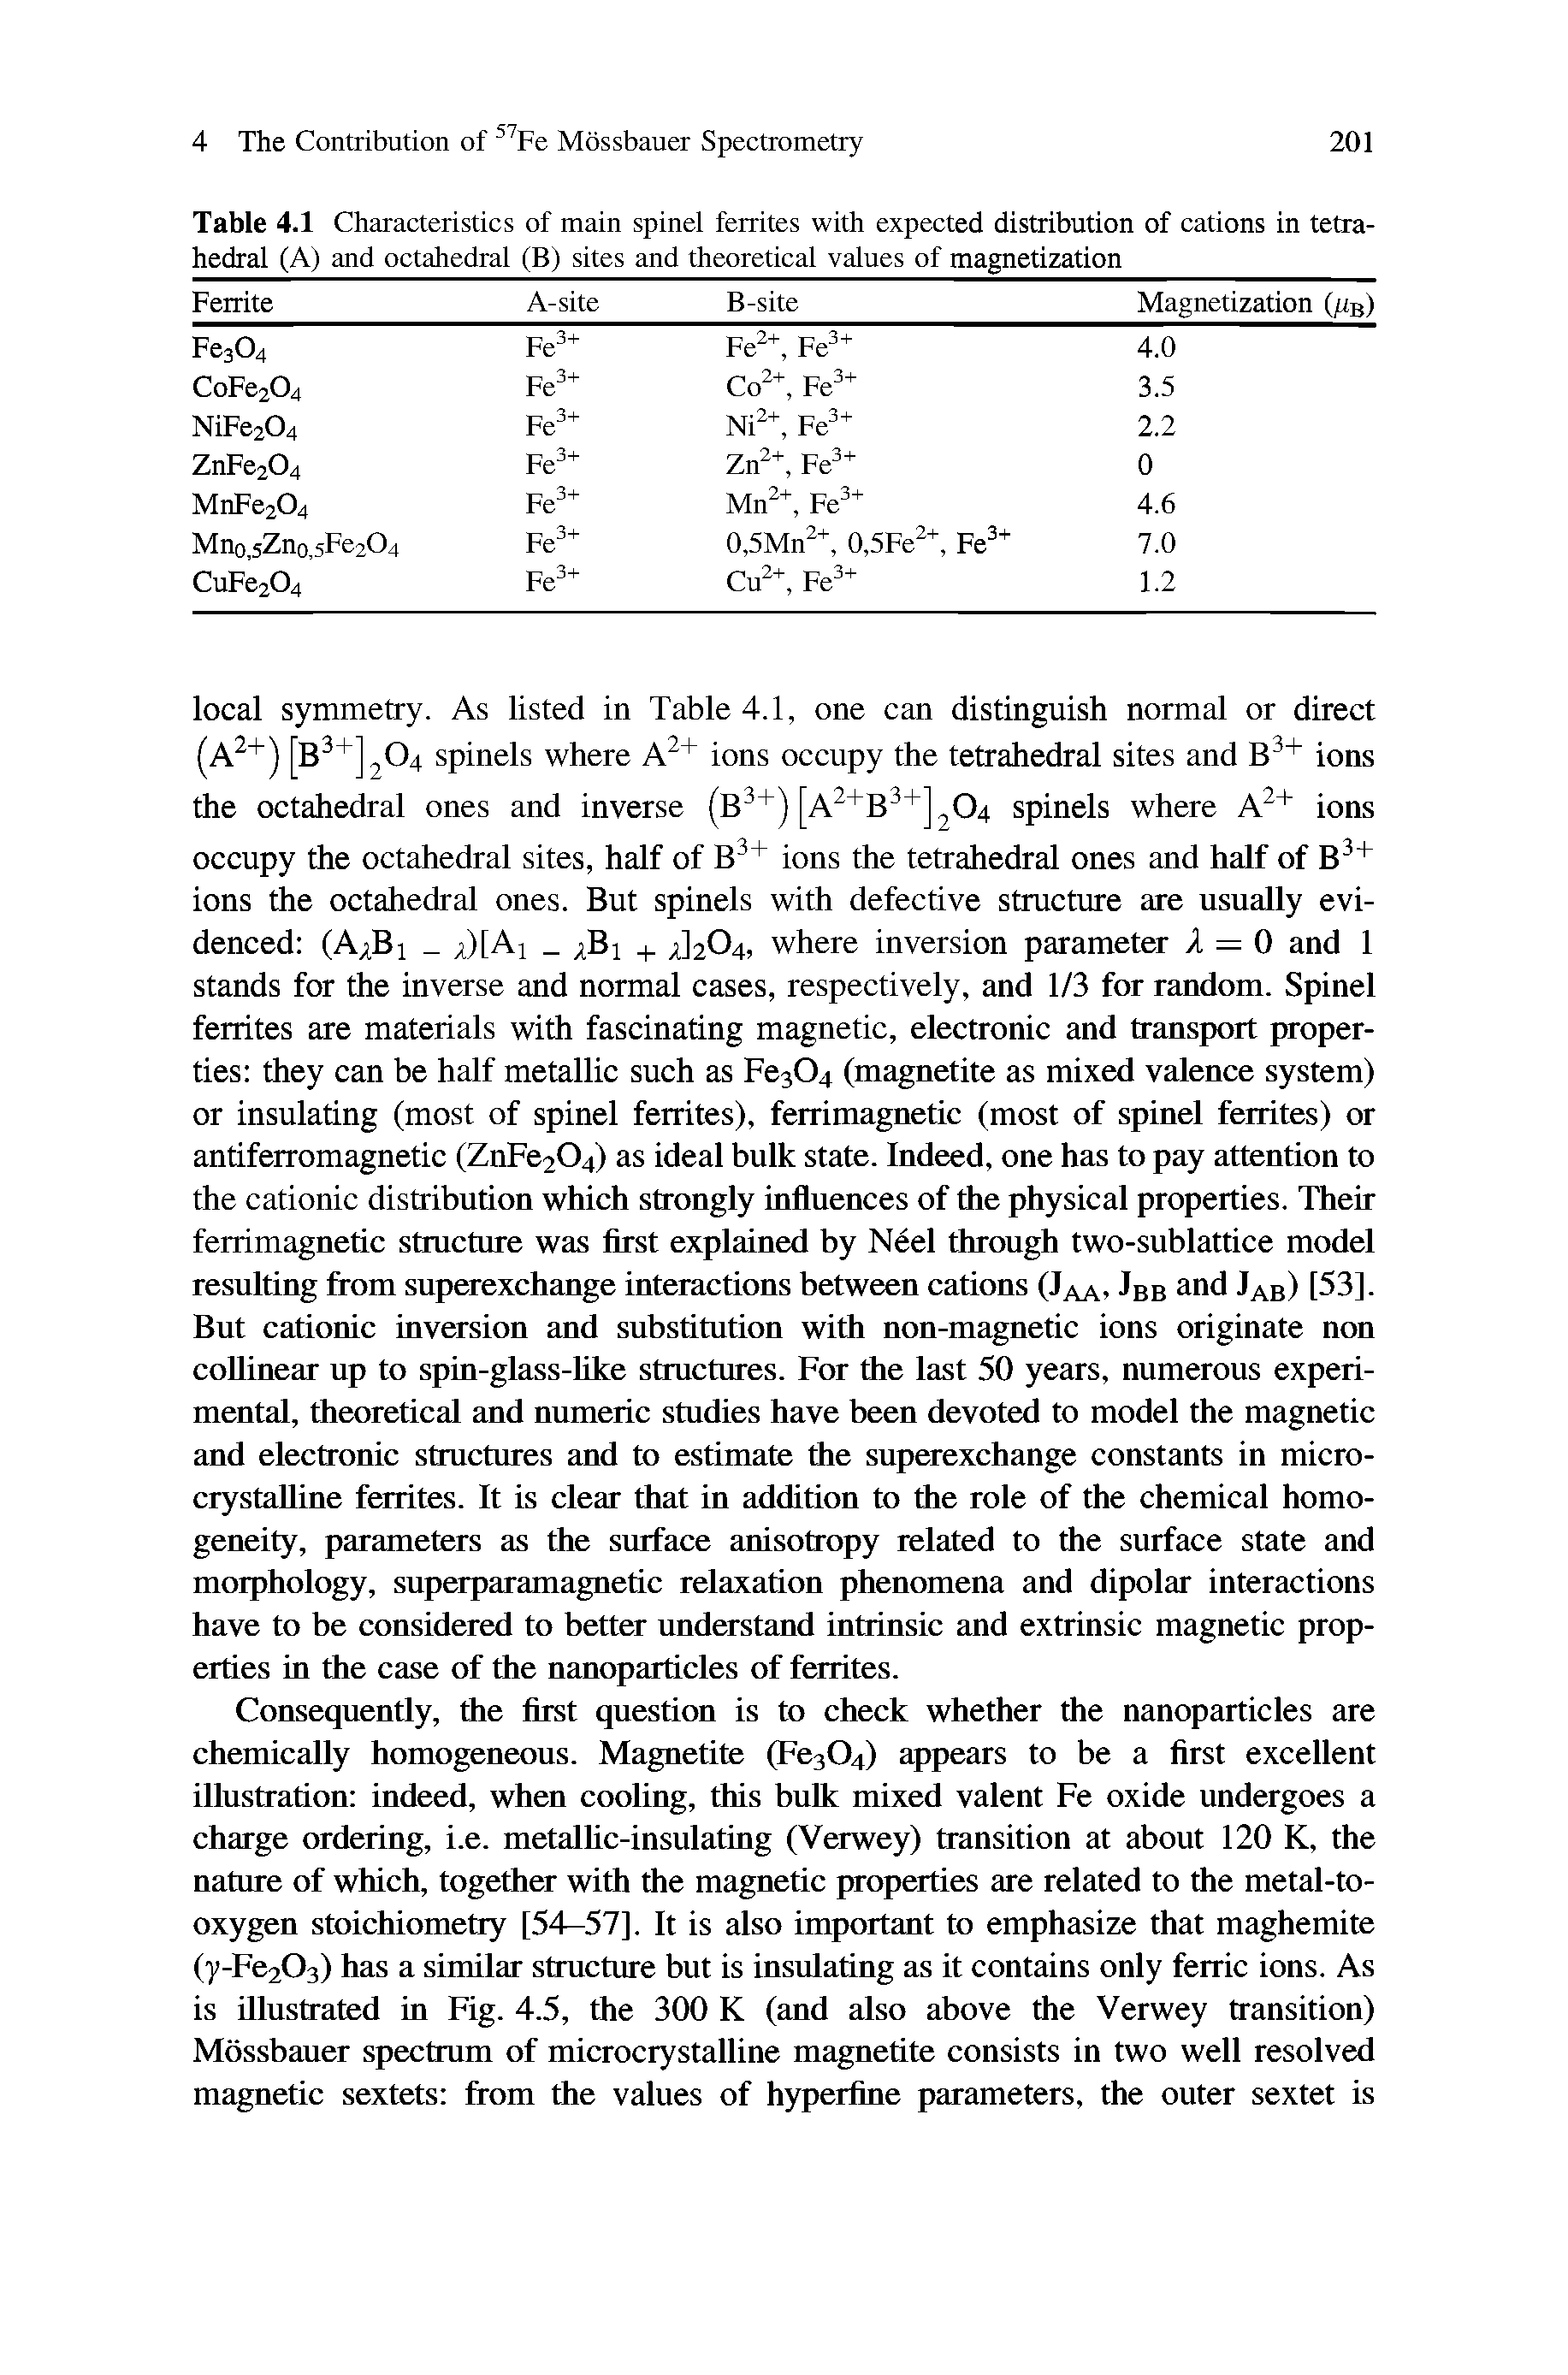 Table 4.1 Characteristics of main spinel ferrites with expected distribution of cations in tetrahedral (A) and octahedral (B) sites and theoretical values of magnetization...